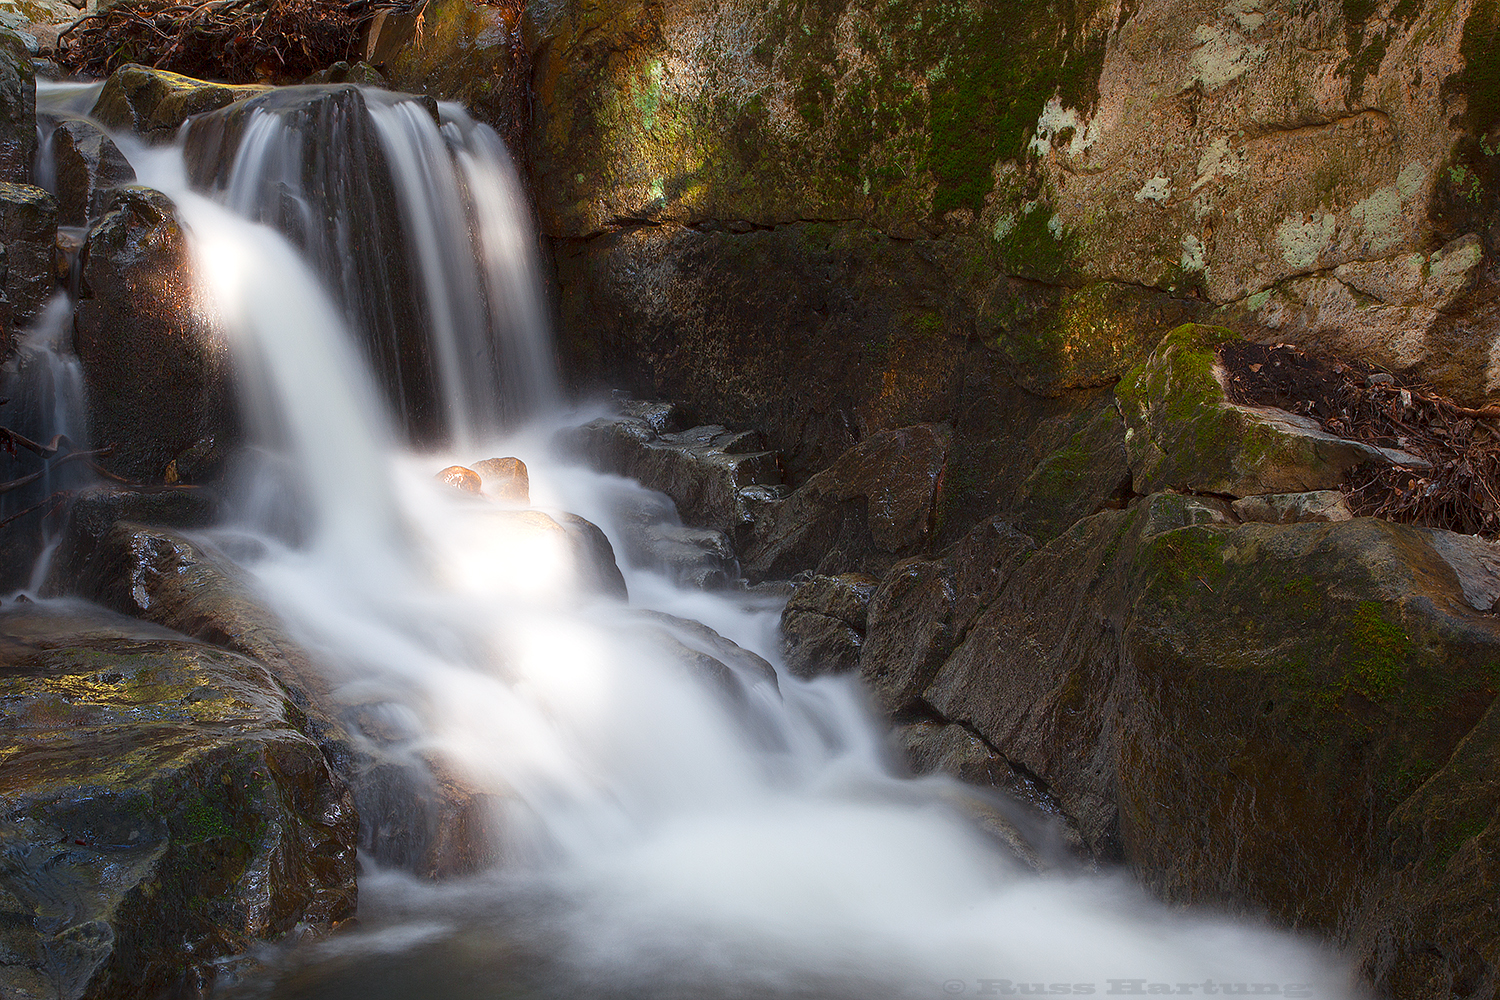 Spring runoff creates many intimate landscapes along the aptly-named Mossy Cascade trail. 